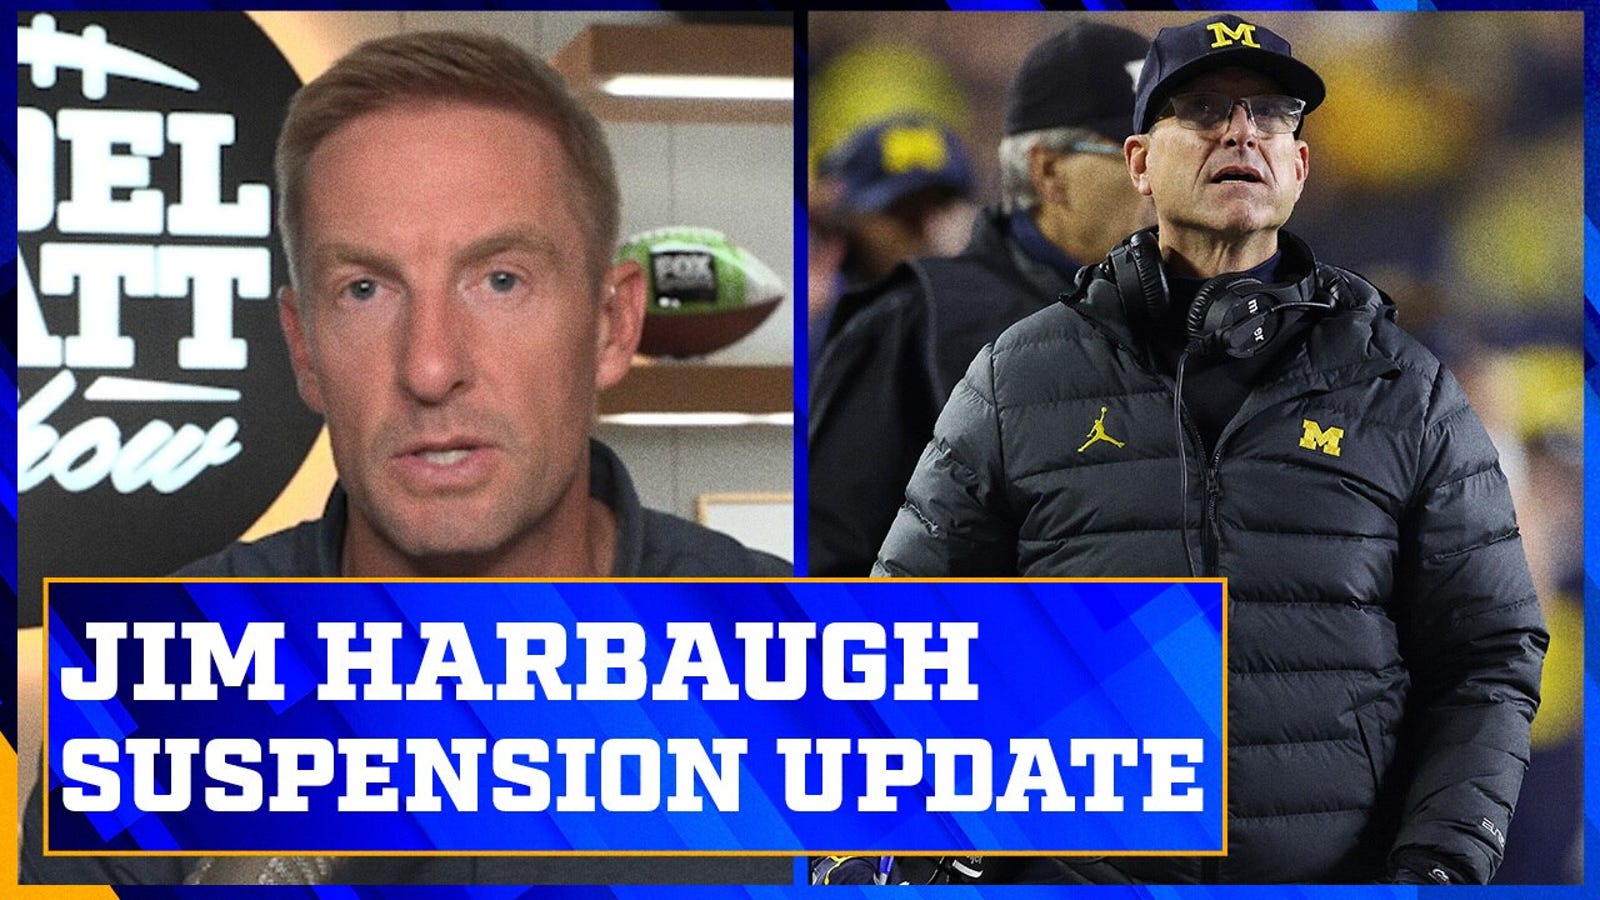 Jim Harbaugh has been suspended three games by the Big Ten